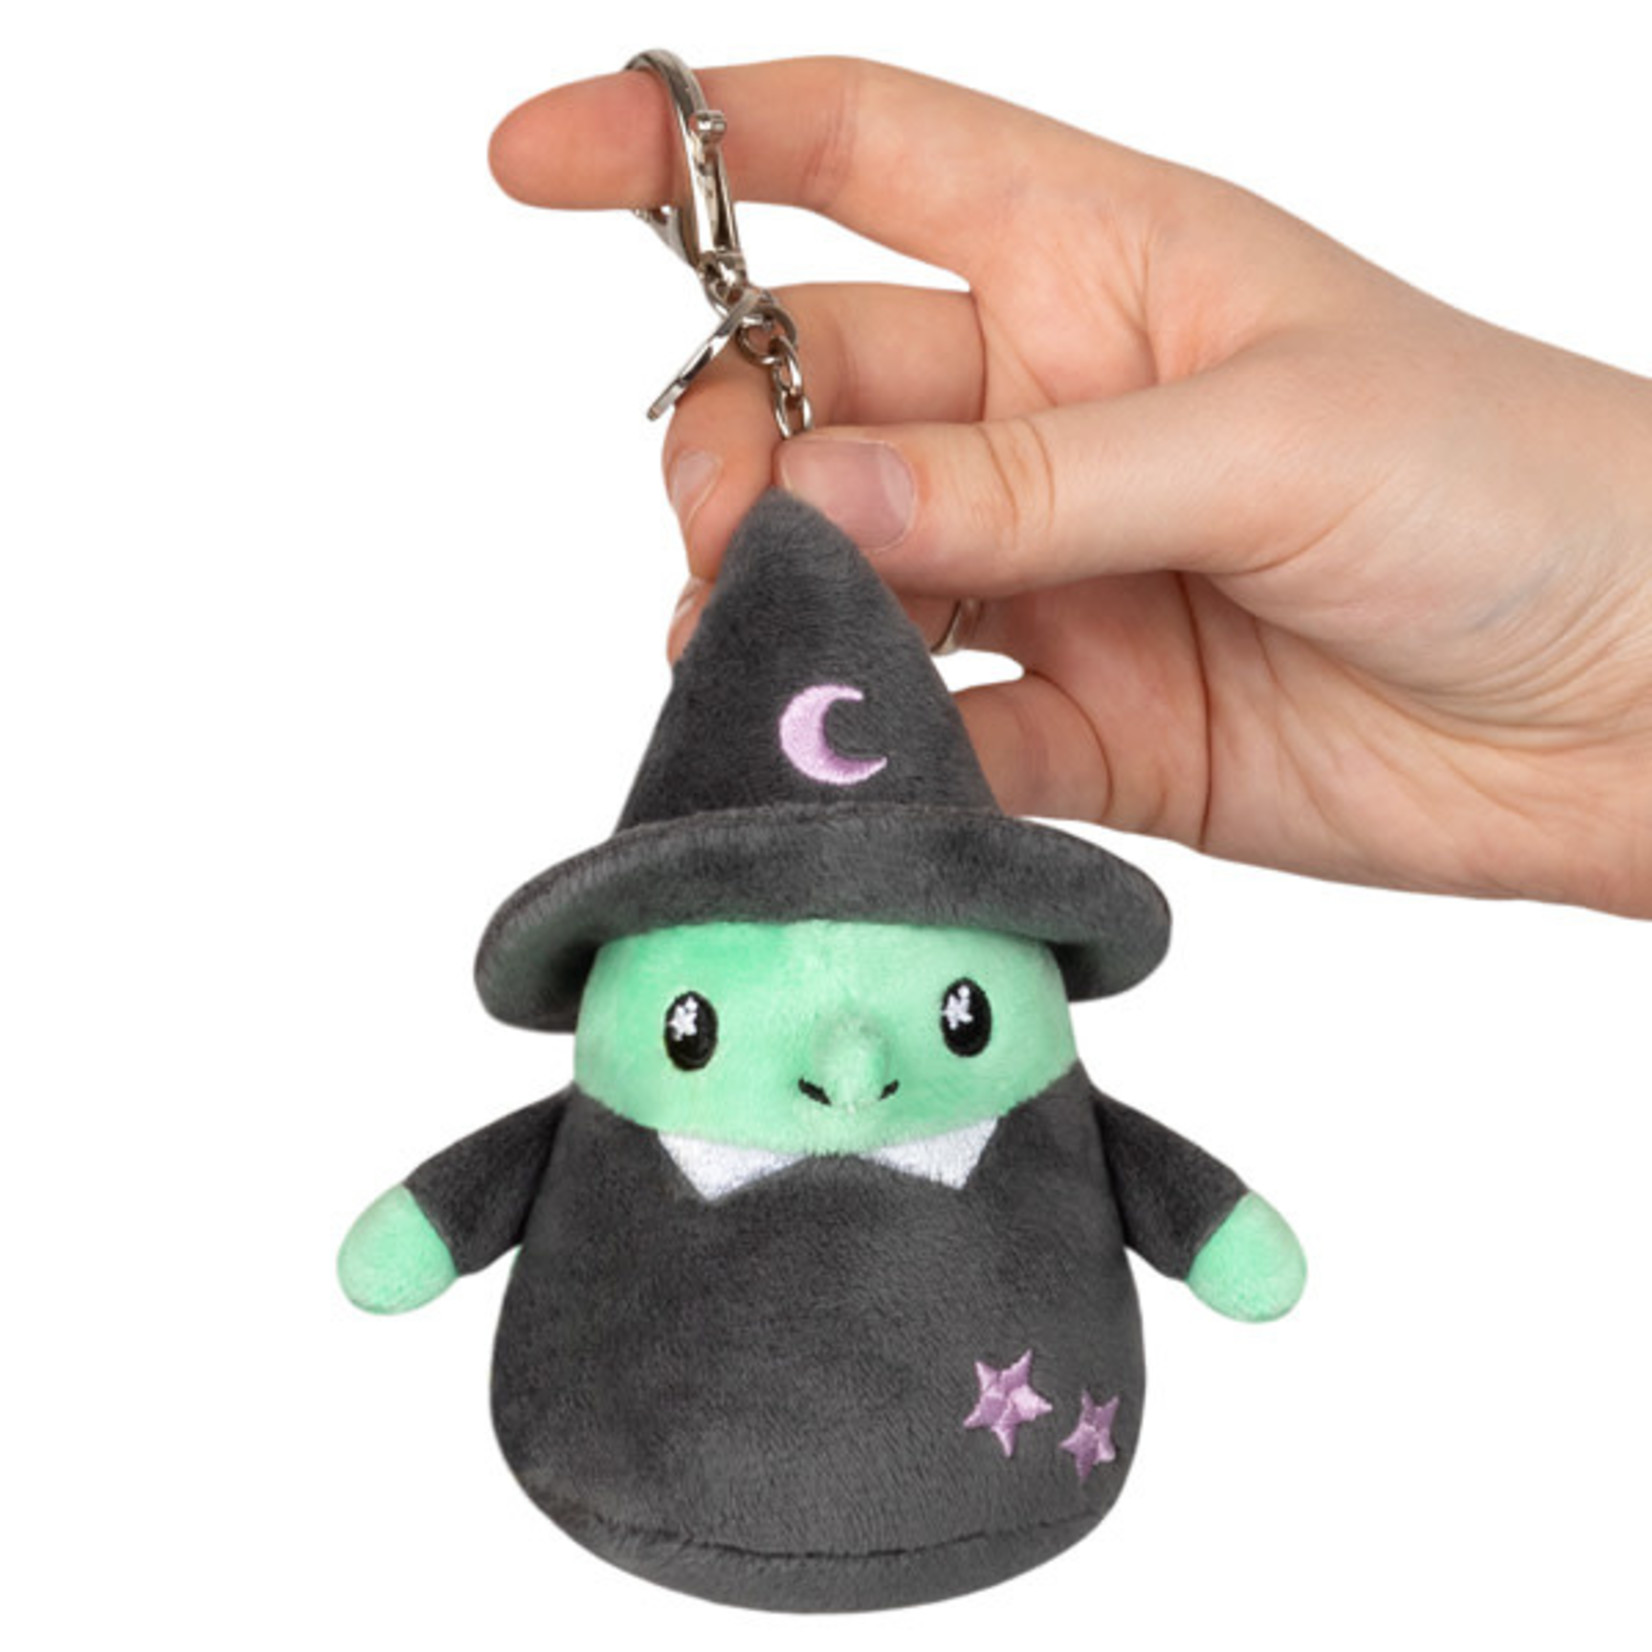 squishable Micro Witch Squishable 5"